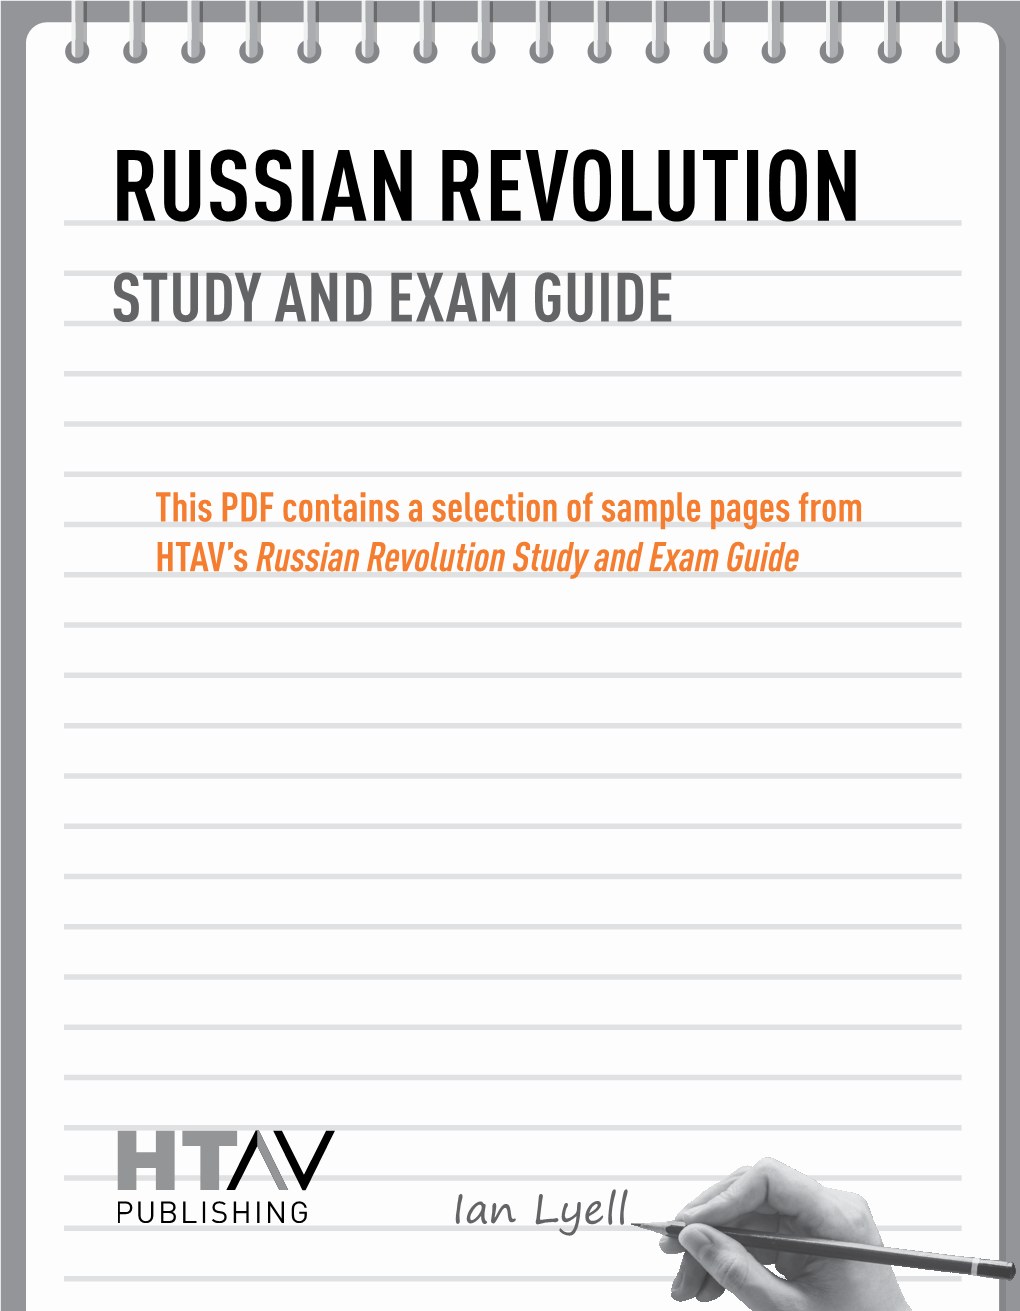 Russian Revolution Study and Exam Guide